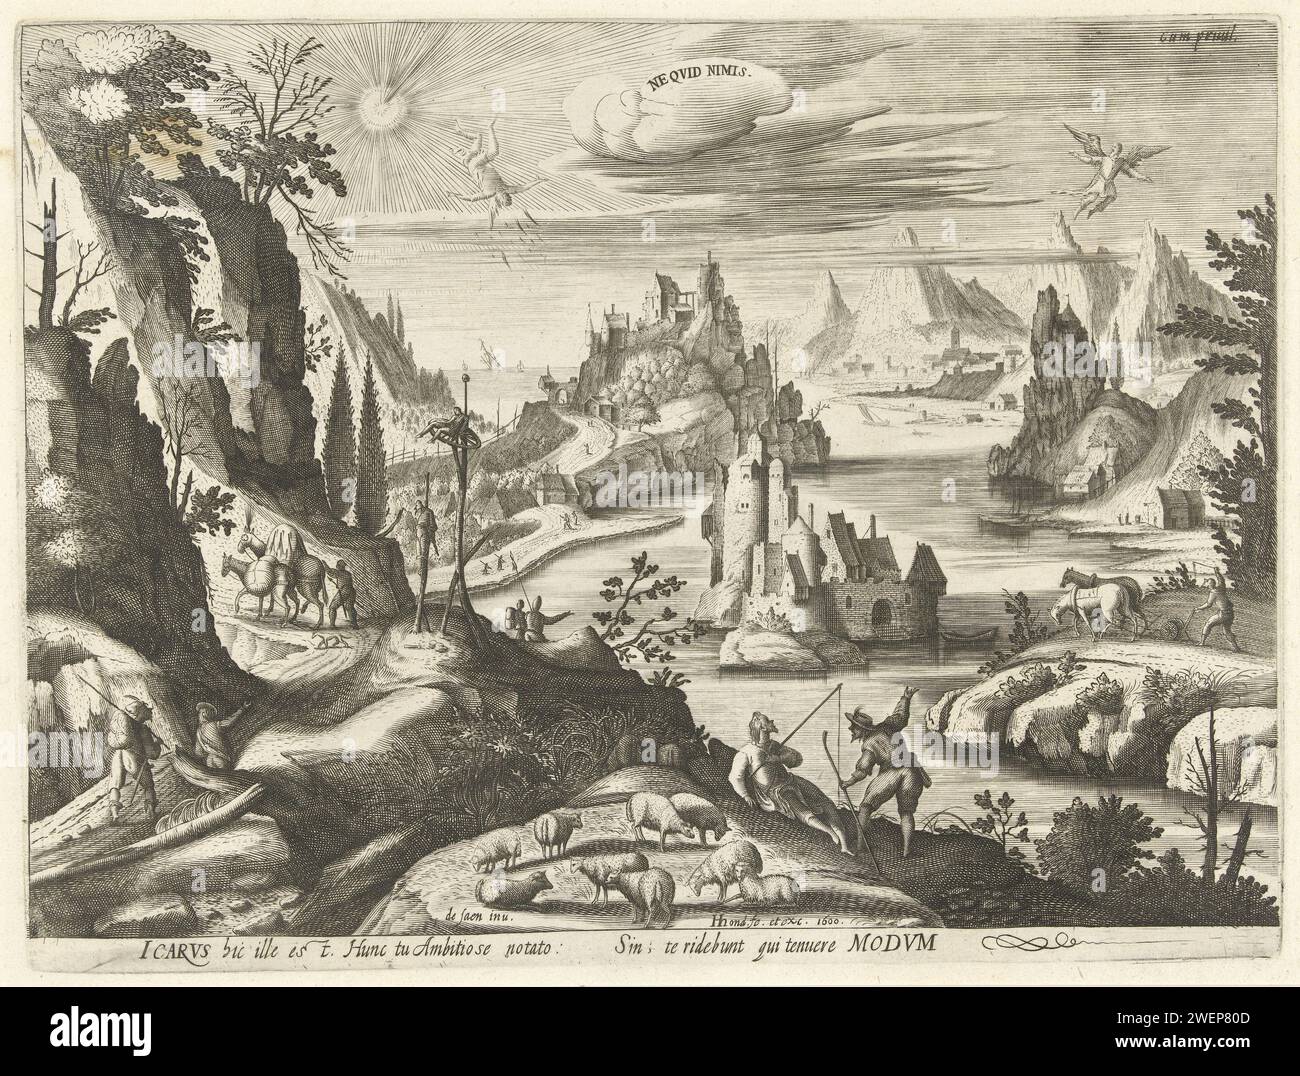 Landscape with the fall of Icarus, Hendrick Hondius (I), After Aegidius van Saen, 1600 print Mountain landscape with a river, above which Icarus tumbles out of the air, after having flown too close to the sun, so that the laundry between its wings has melted. On the right in the air are father Daedalus. In the foreground, countrymen are busy with their daily activities and look up surprised. All in the background a sea with a few ships. Under the show a text in Latin.  paper engraving death i.e. the fall of Icarus, without Daedalus. river. angling Stock Photo